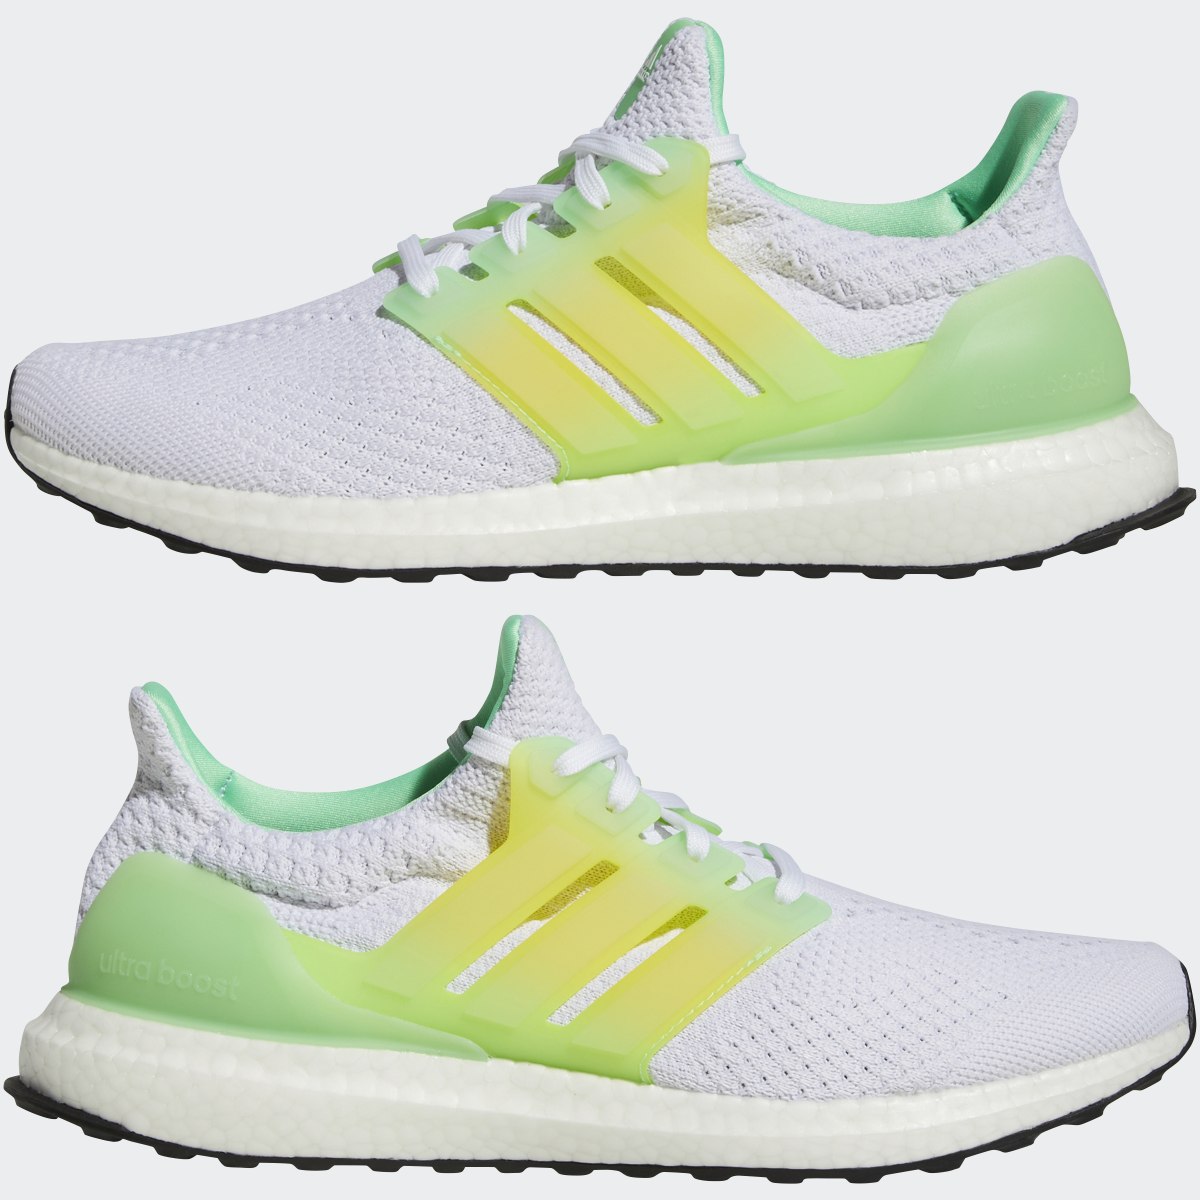 Adidas Ultraboost 5.0 DNA Shoes. 8